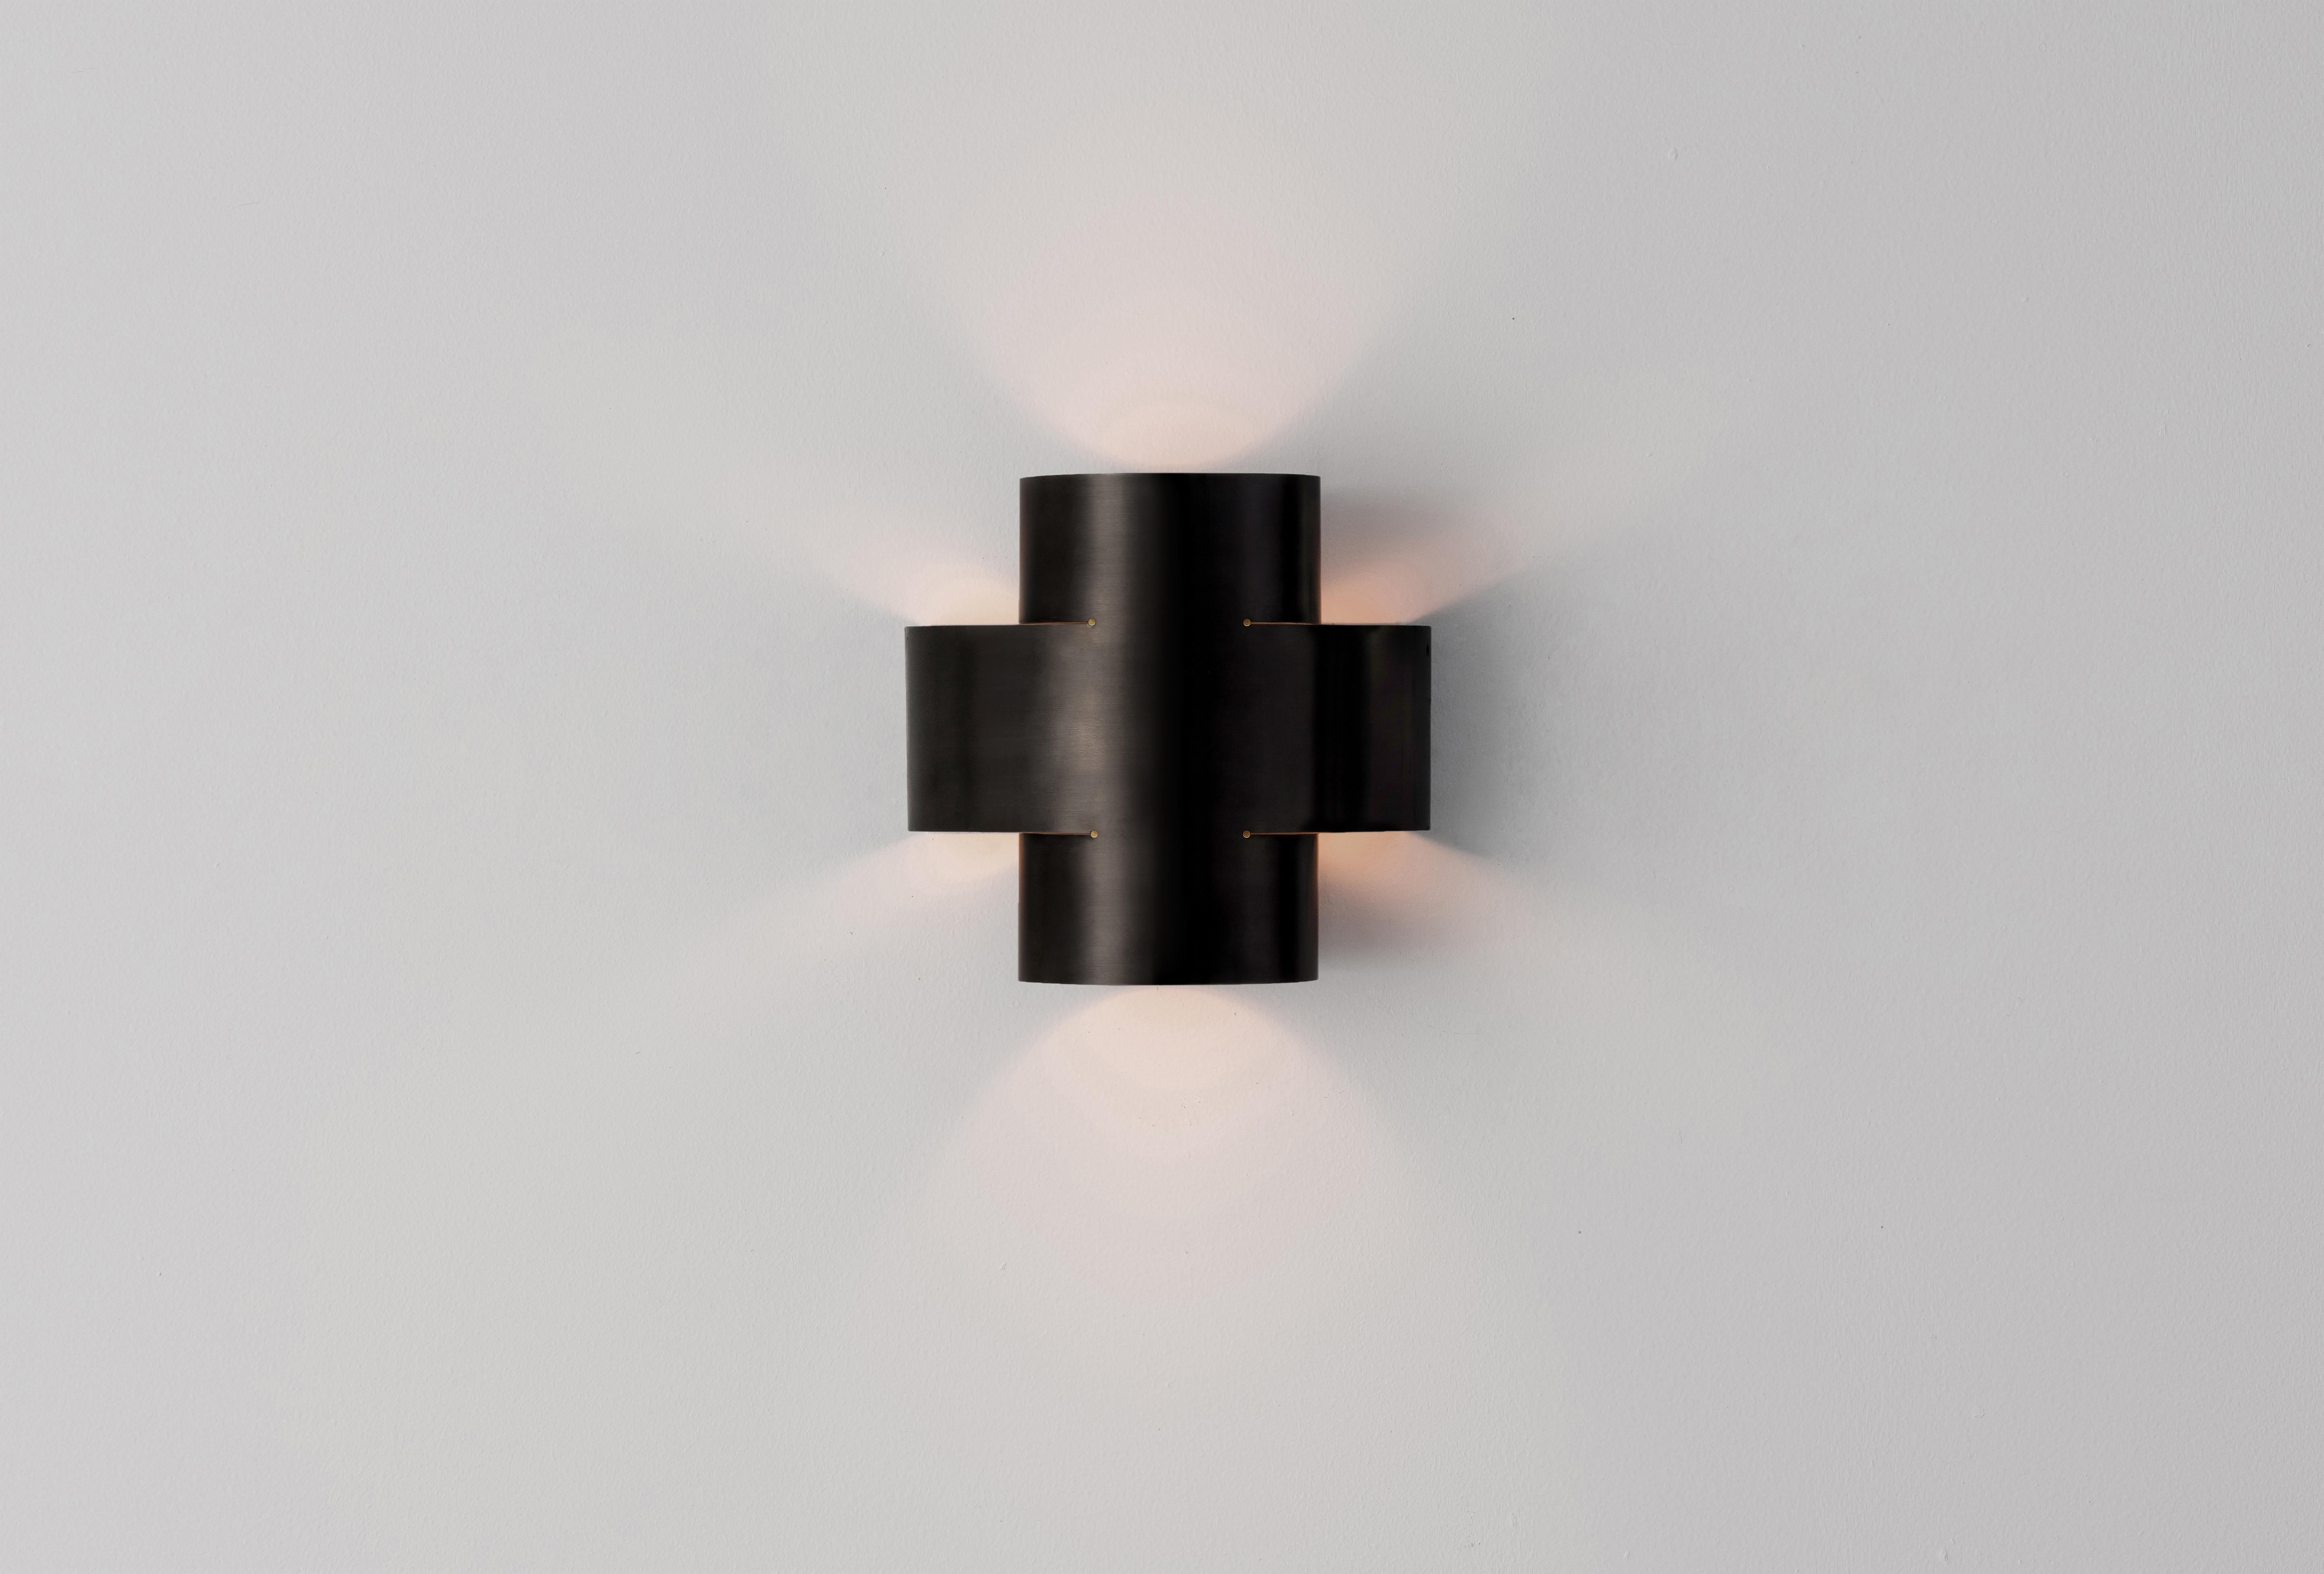 Burnt brass plus one small wall lamp by Paul Matter.
Dimensions: L 167 mm, H 170 mm, D 104 mm
1 Type E27 Base, 3W - 5W LED
Warm white, voltage 220-240V
CE Certified
Dimmable upon request
Materials: Brass

Finished in burnt, aged, buffed